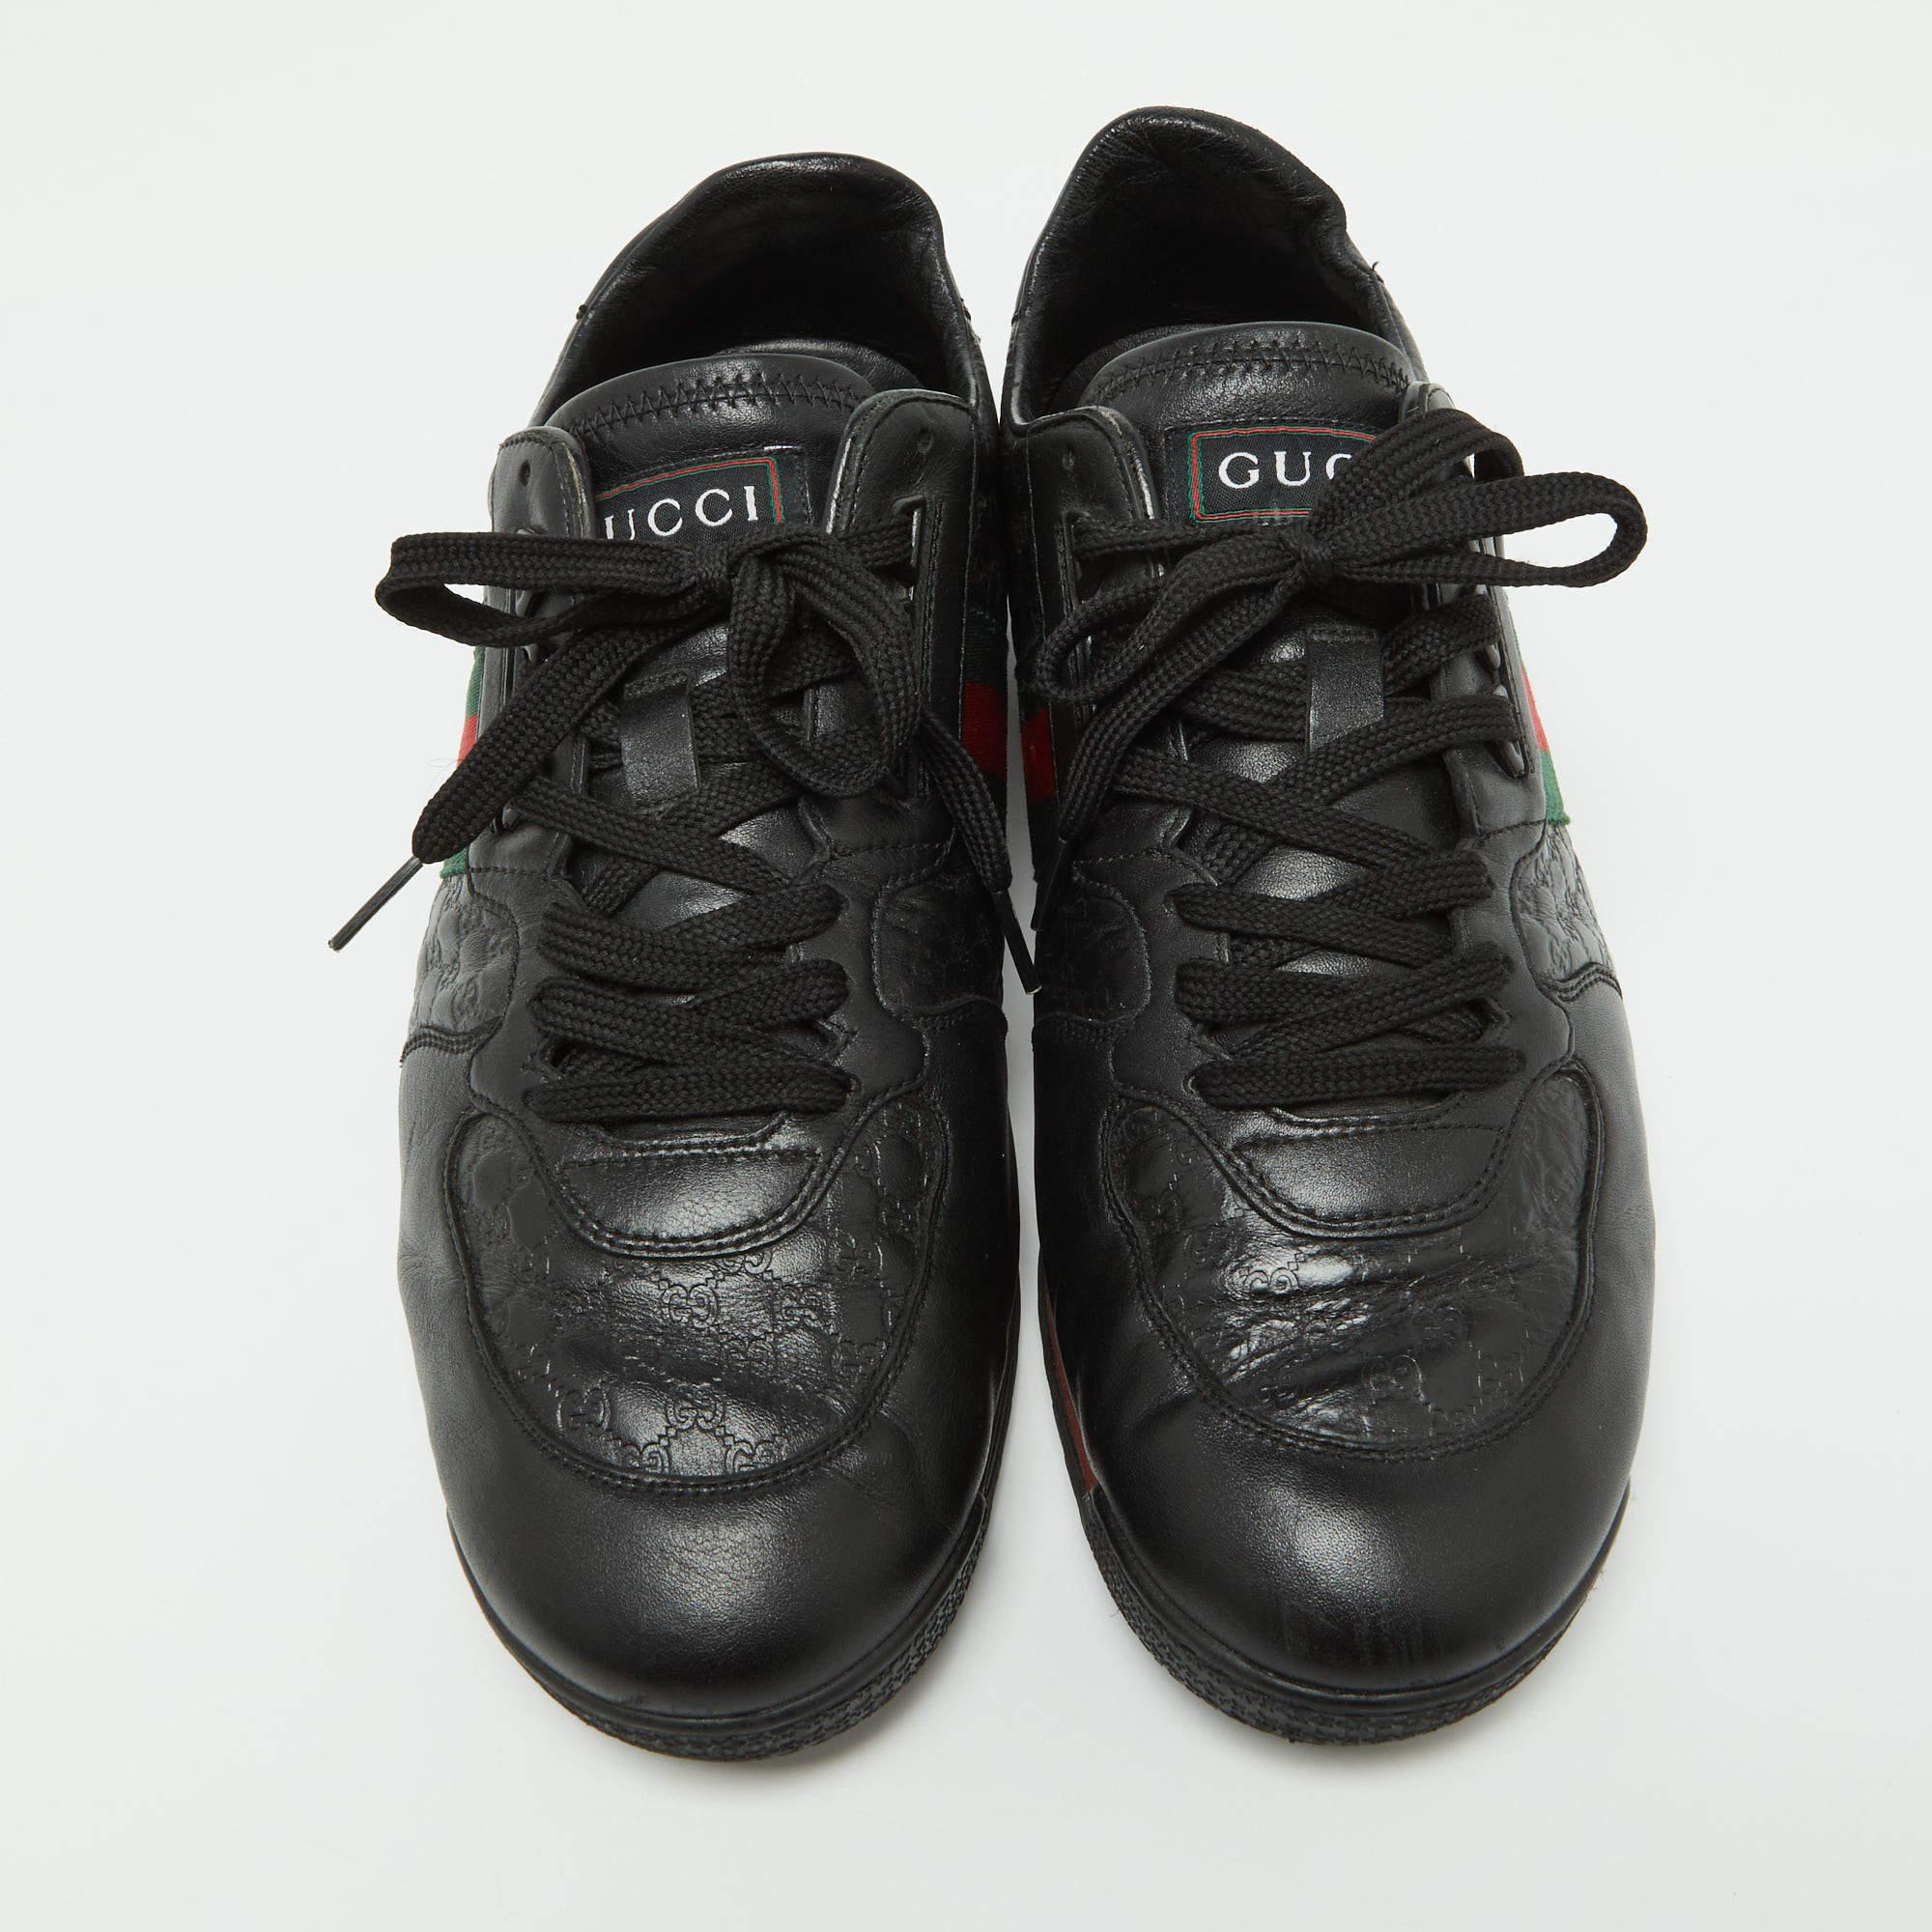 Men's Gucci Black Leather Web Lace Up Sneakers Size 45.5